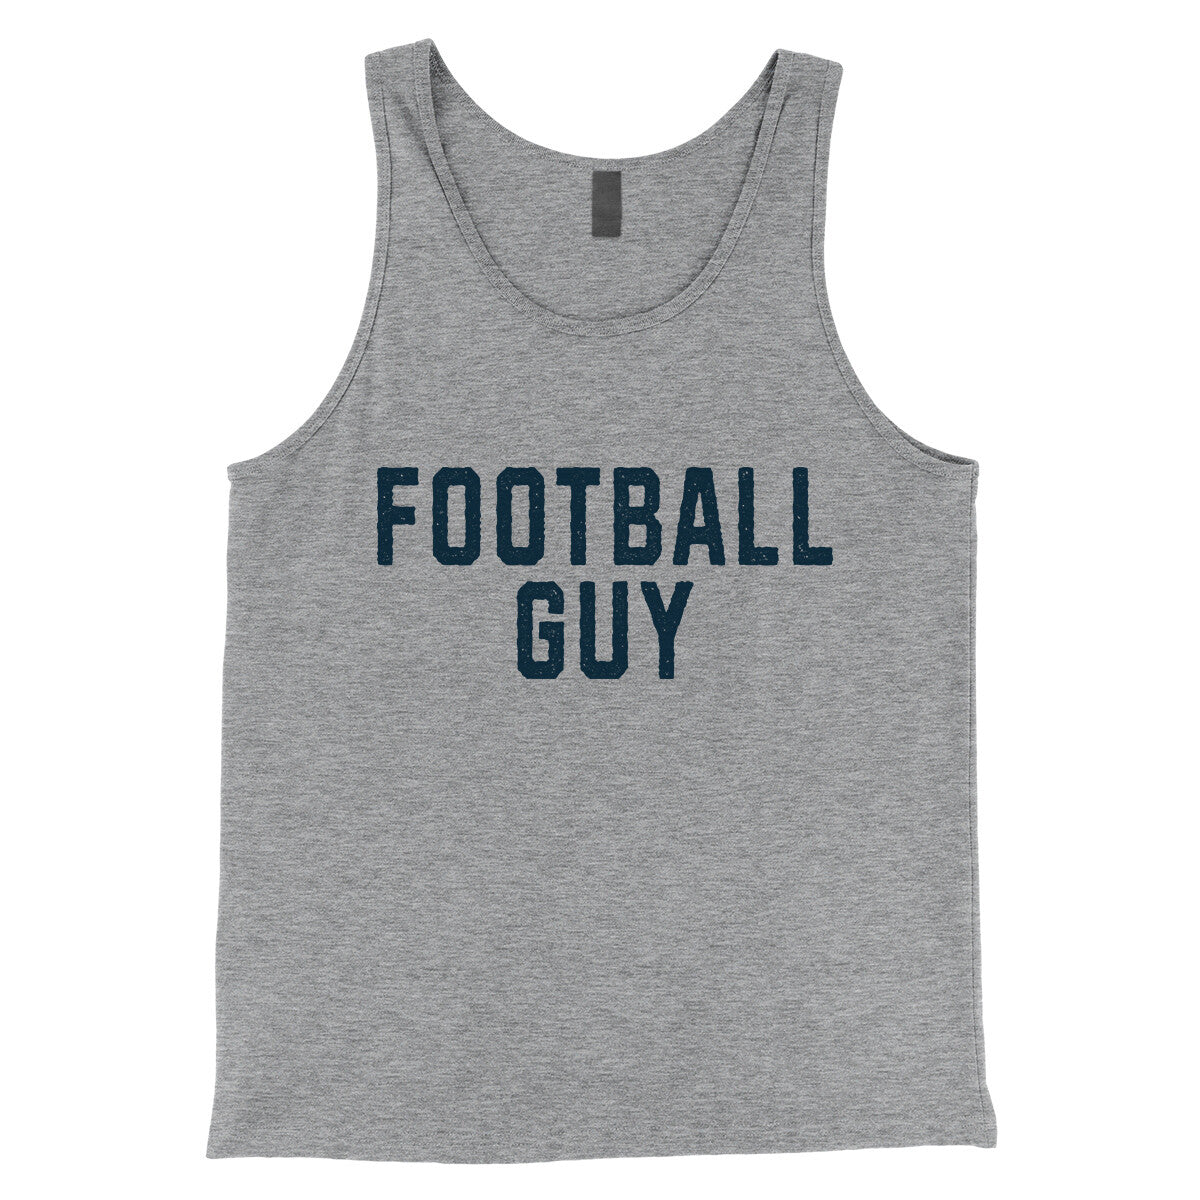 Football Guy in Athletic Heather Color